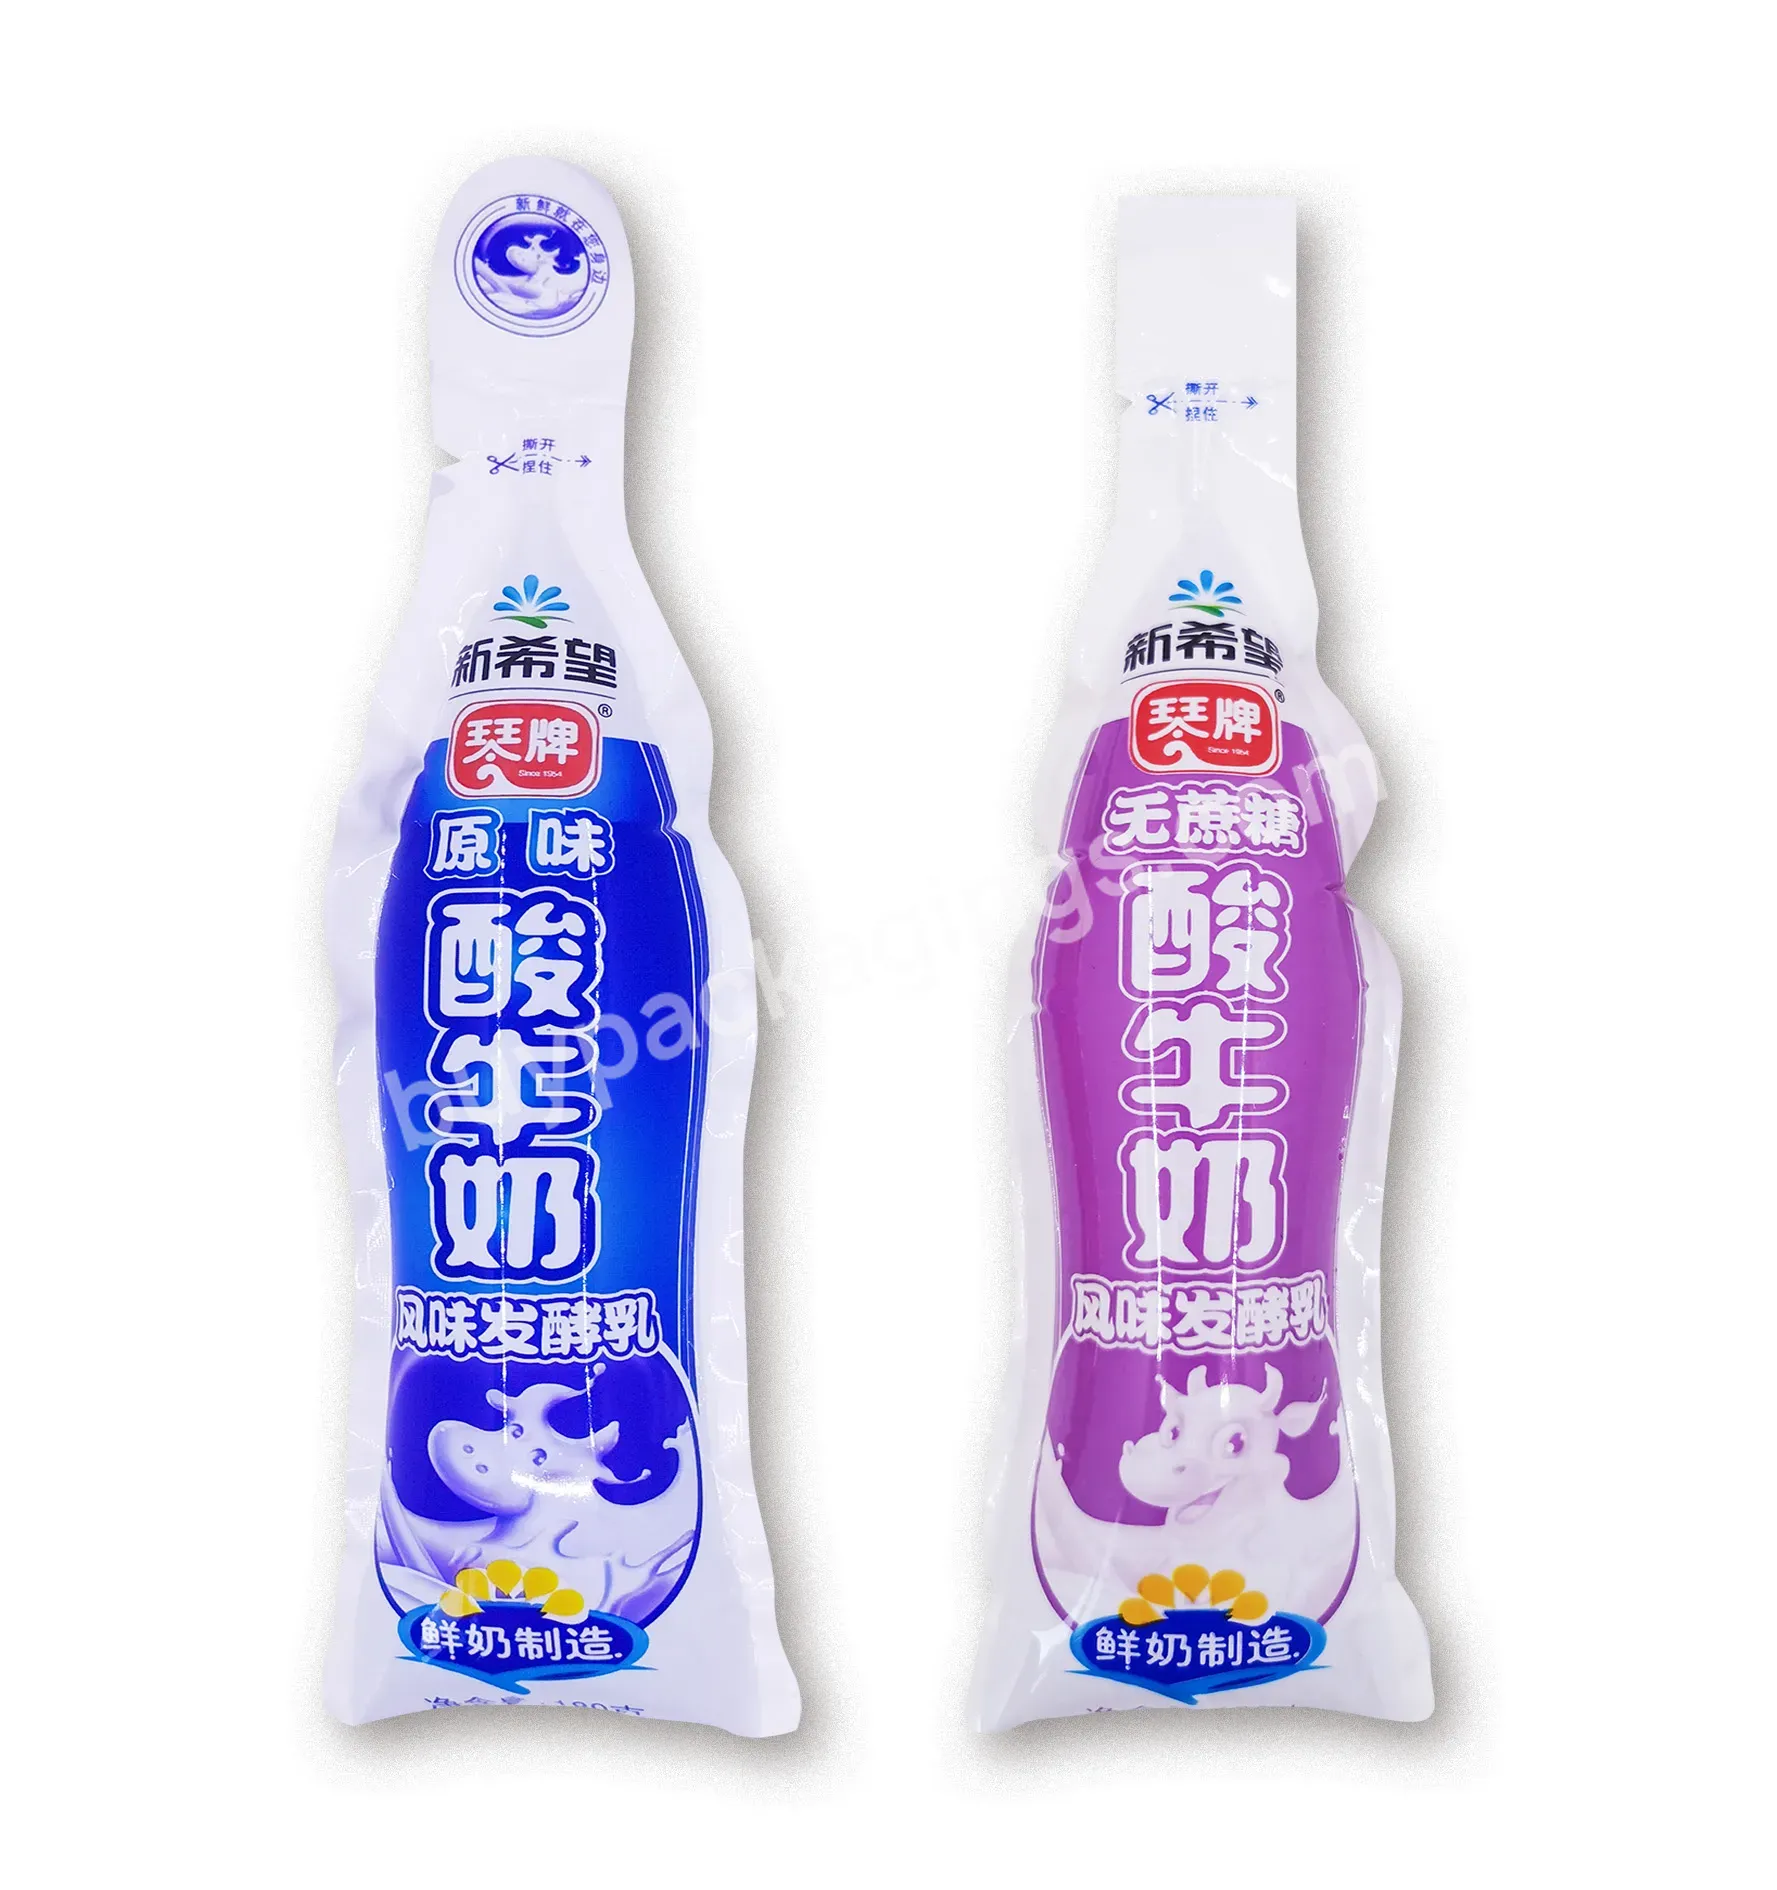 Special Bottle Shaped Pouch Beverage Injection Packing Bag Soft Plastic Yogurt Juice Pouch With Straw - Buy Special Bottle Shaped Pouch,Beverage Injection Packing Bag,Soft Plastic Yogurt Juice Pouch With Straw.